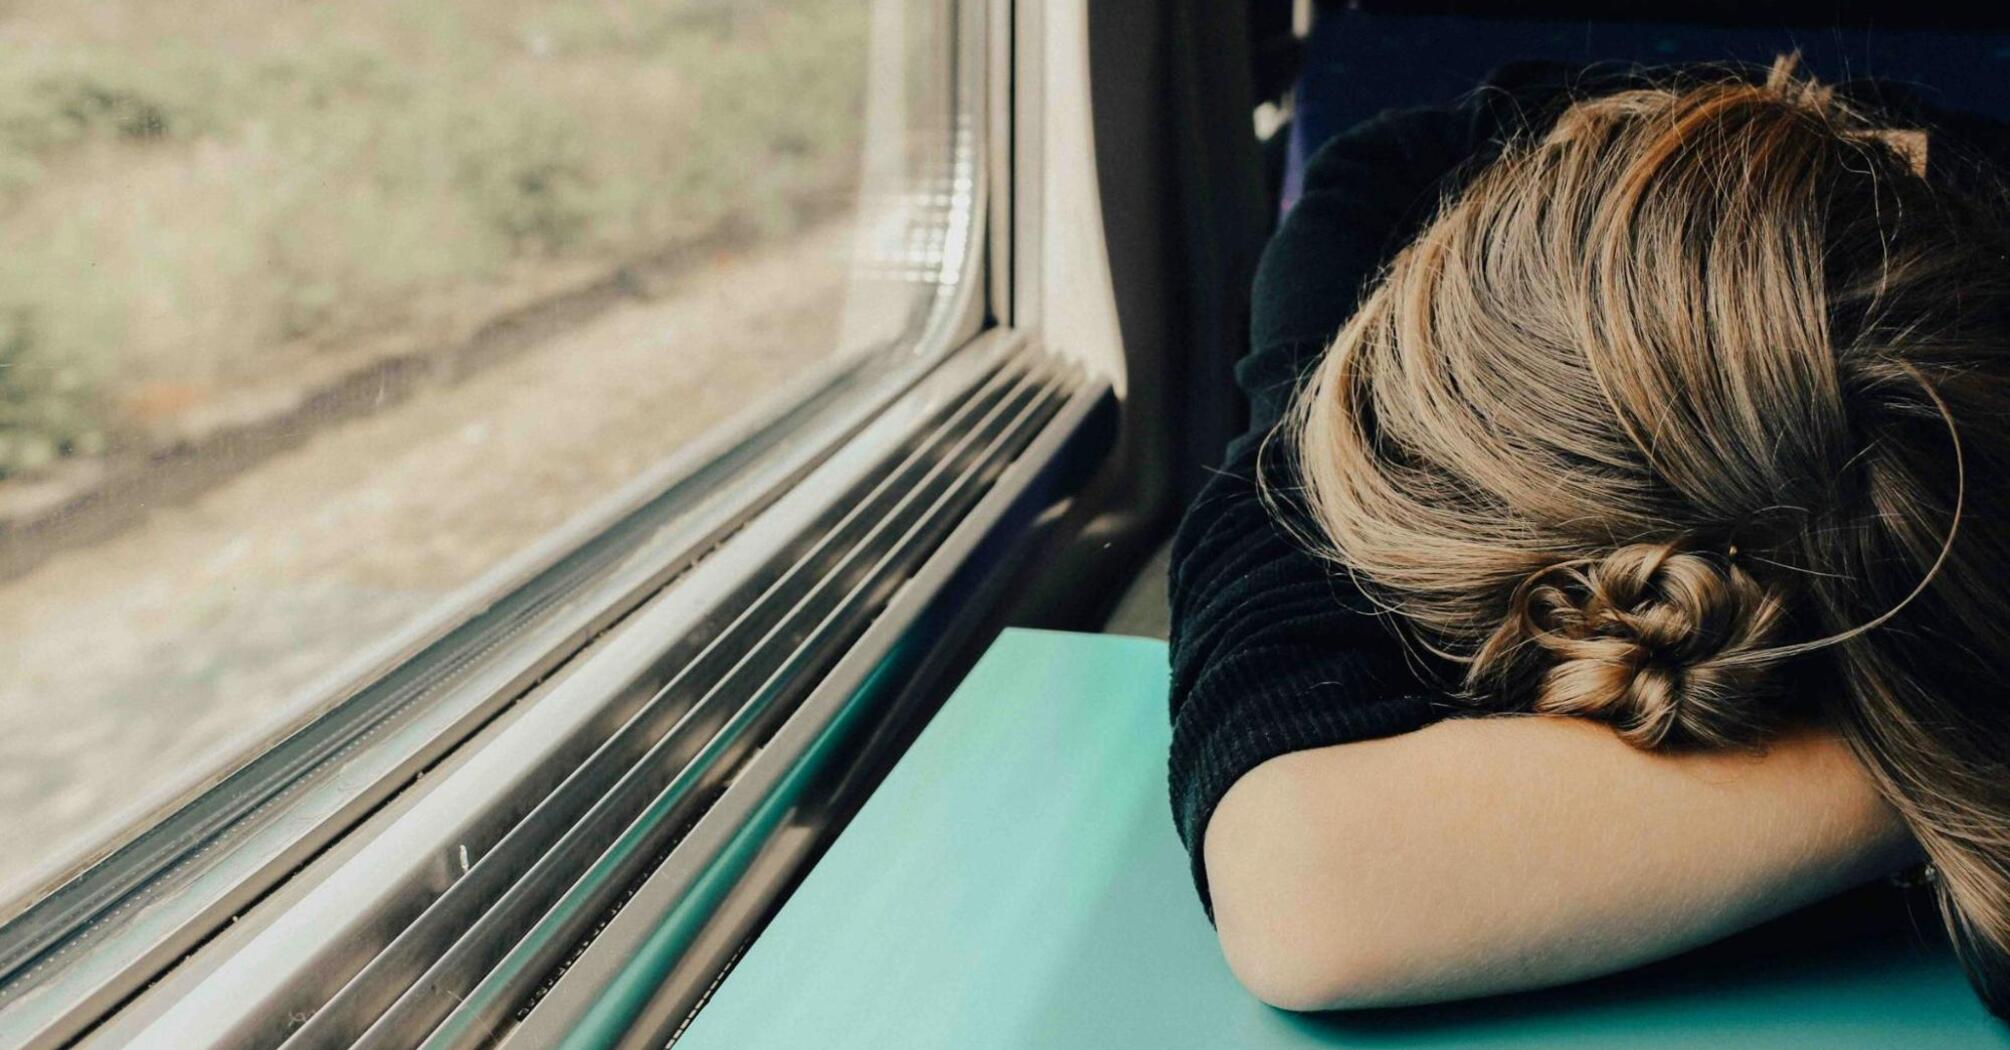 A person resting their head on a table in transport